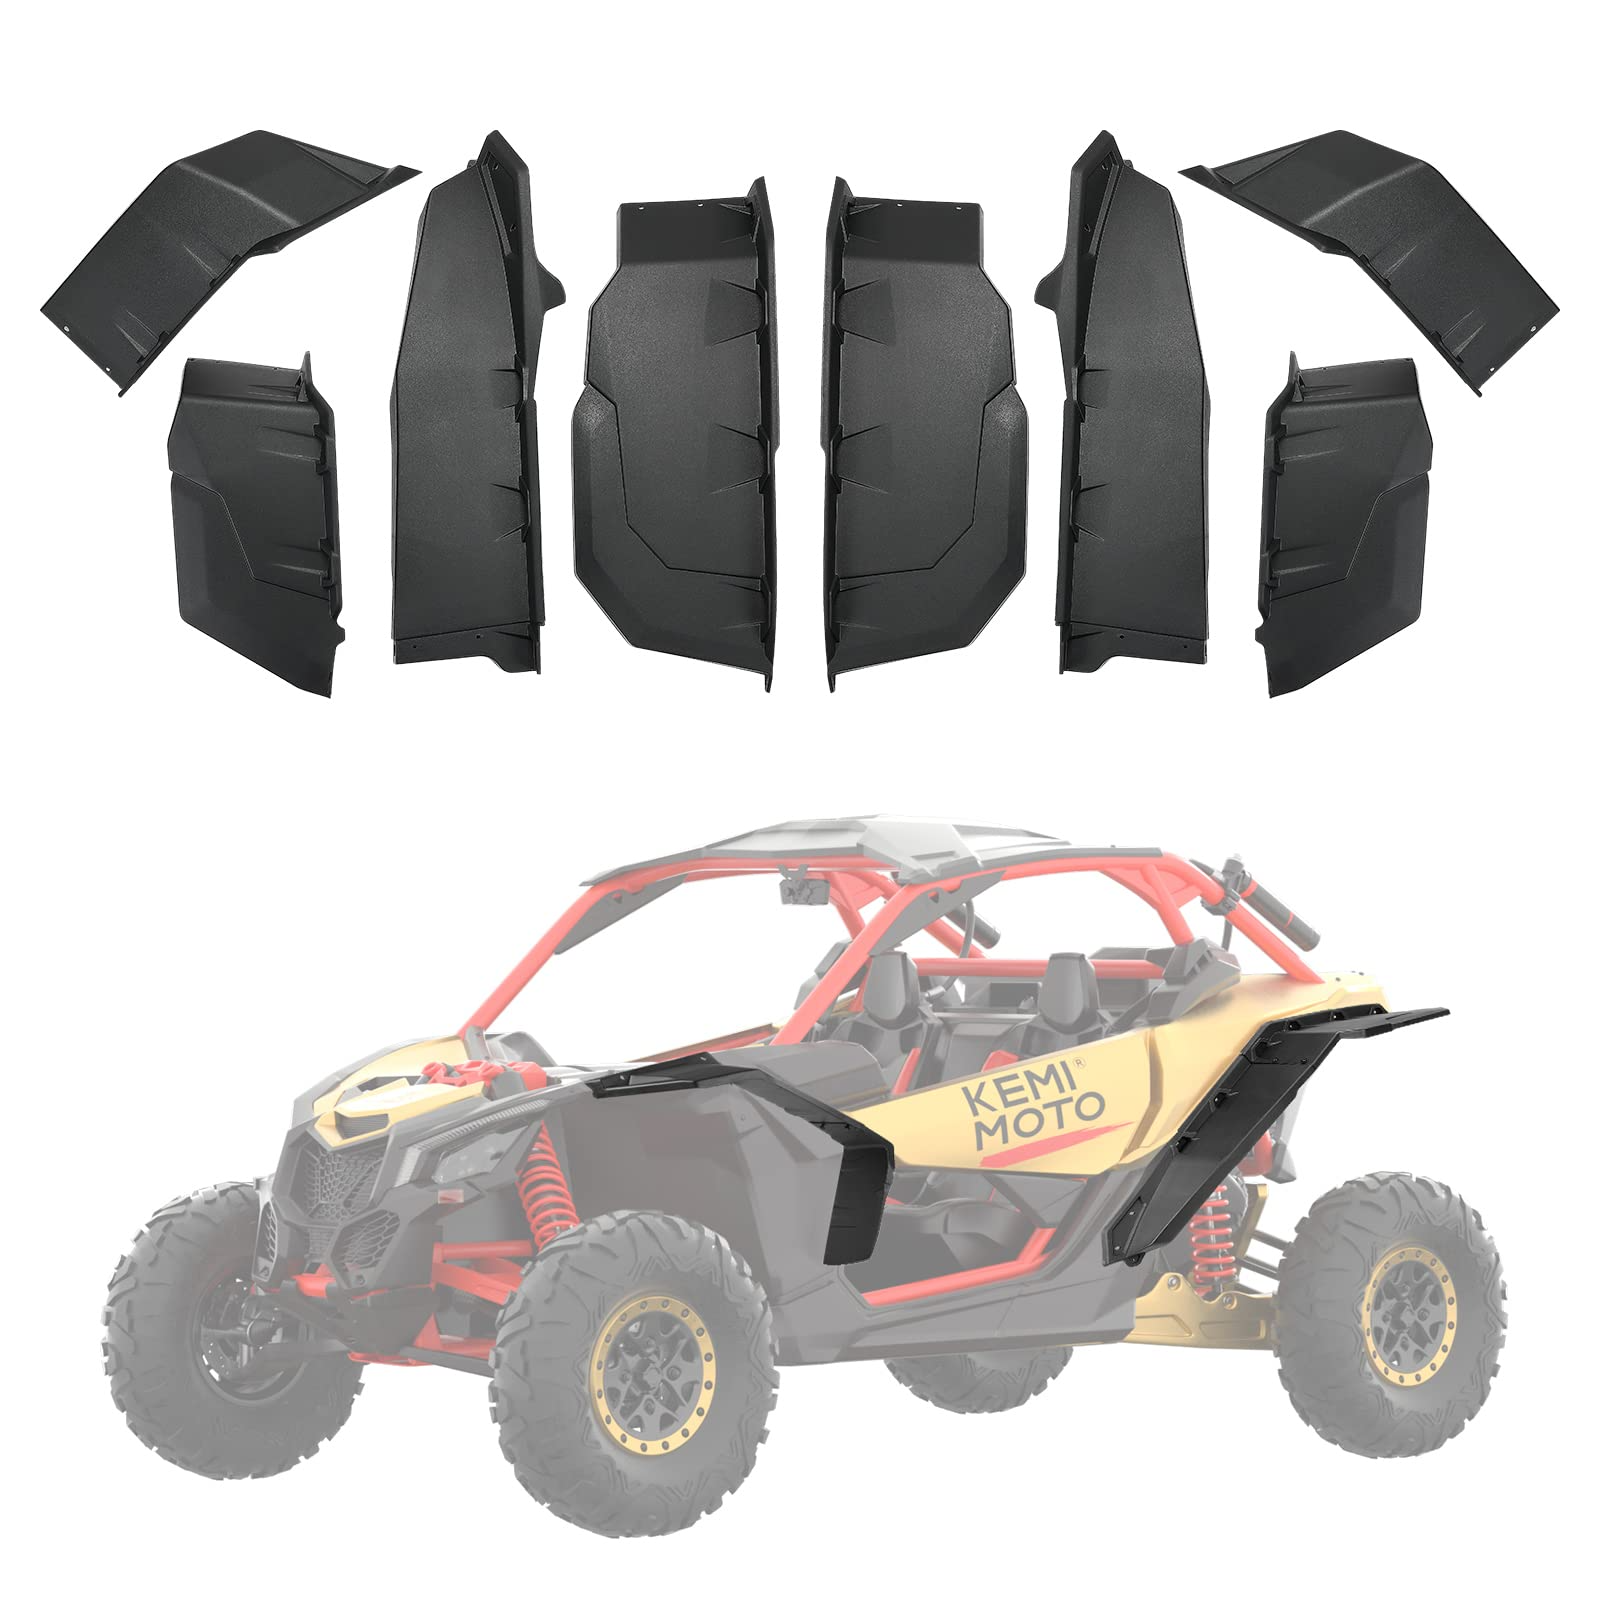 Front Lower Doors & Extended Fender Flares For Can-Am Maverick X3 MAX - Kemimoto